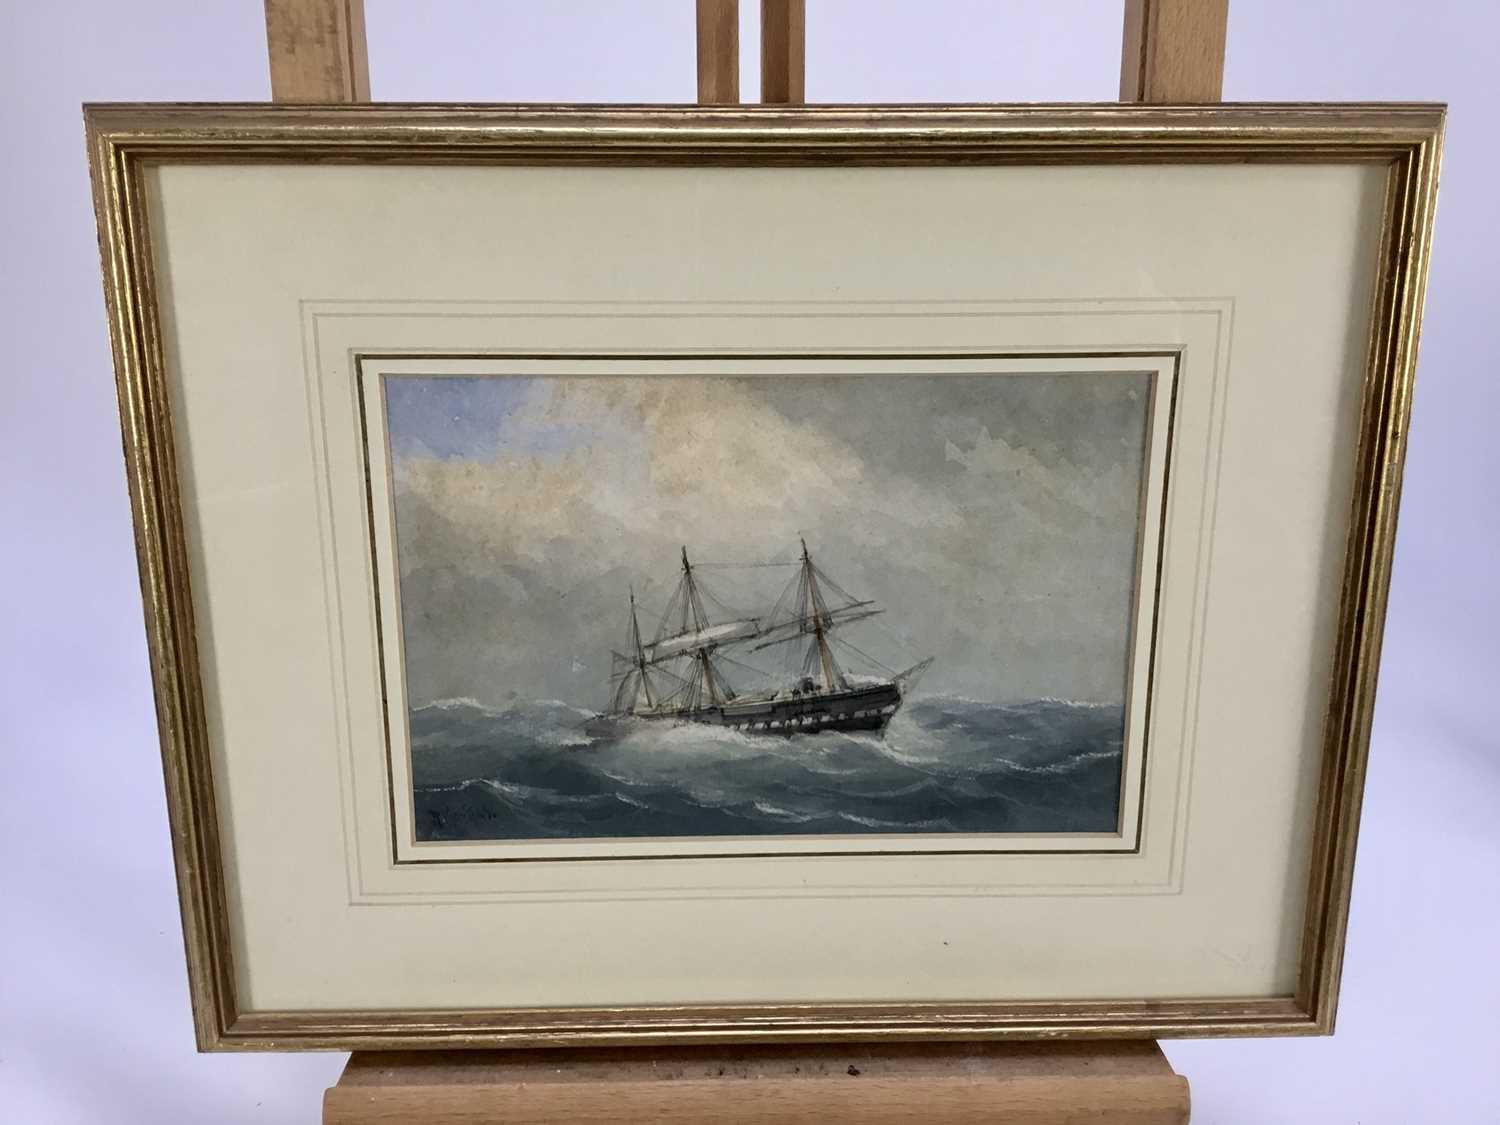 Lot 50 - Richmond Markes watercolour - Seascape with shipping, signed, 21.5cm x 14.5cm mounted in glazed gilt frame, 37cm x 29cm overall